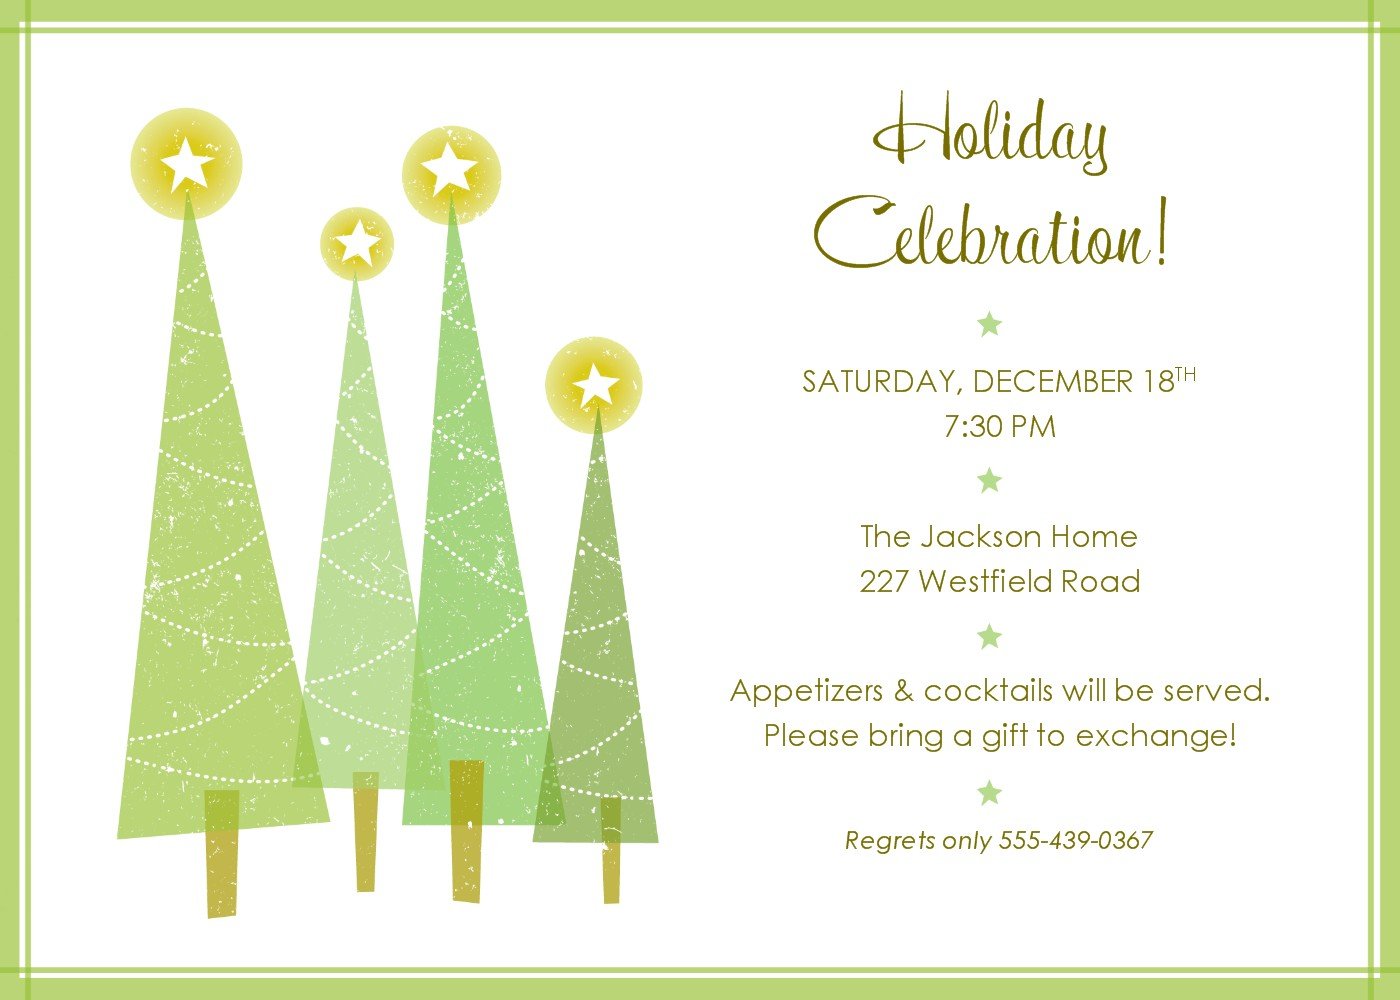 Holiday Party Email Invitation Template